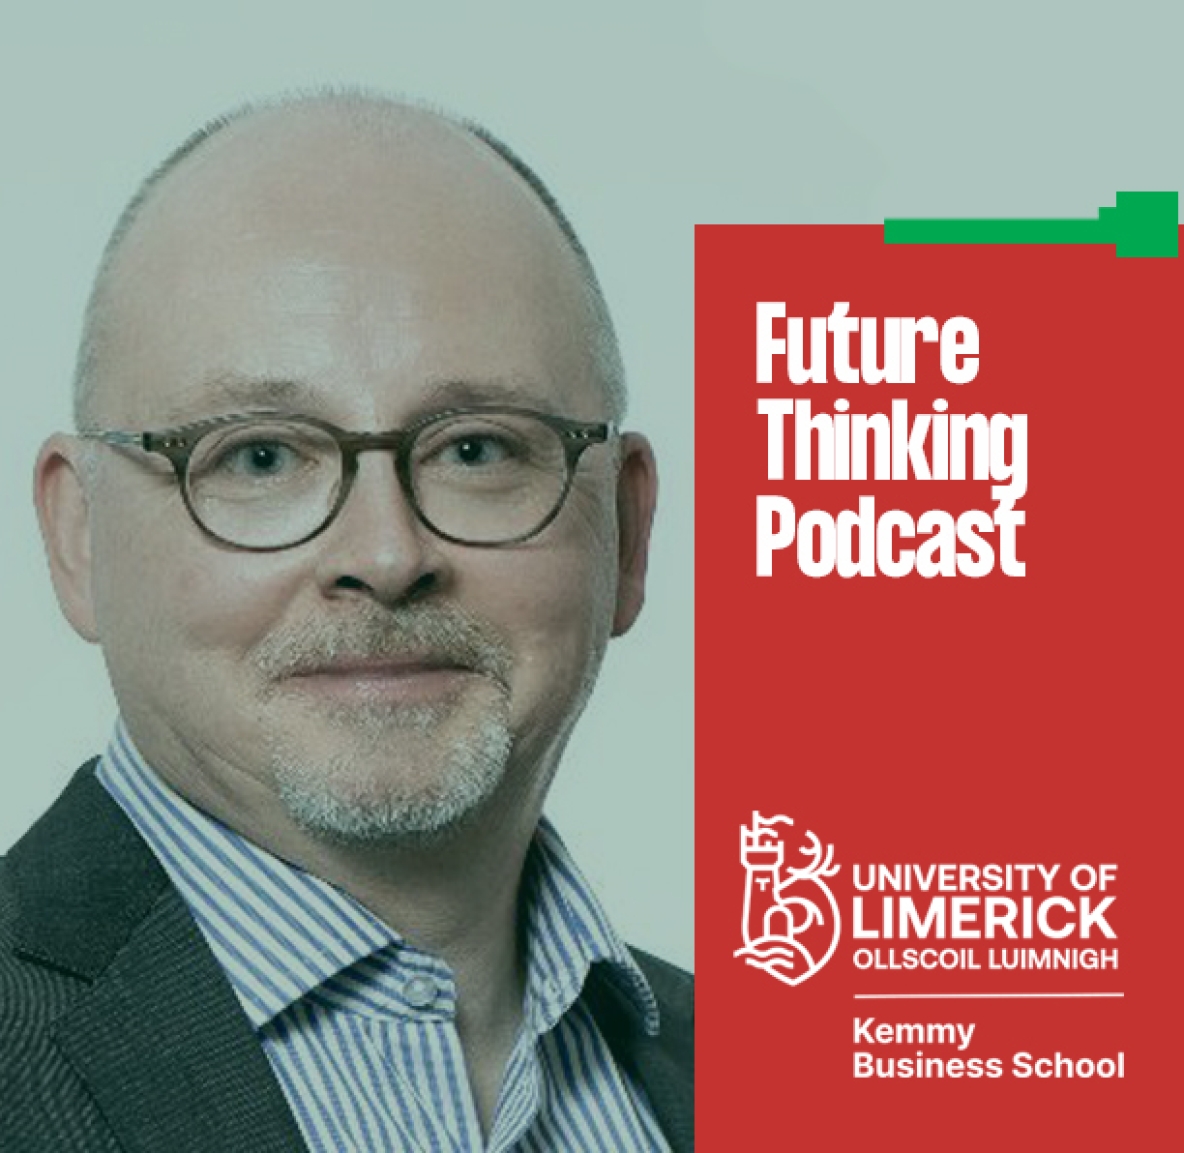 Future thinking Podcast guest Michael Diviney